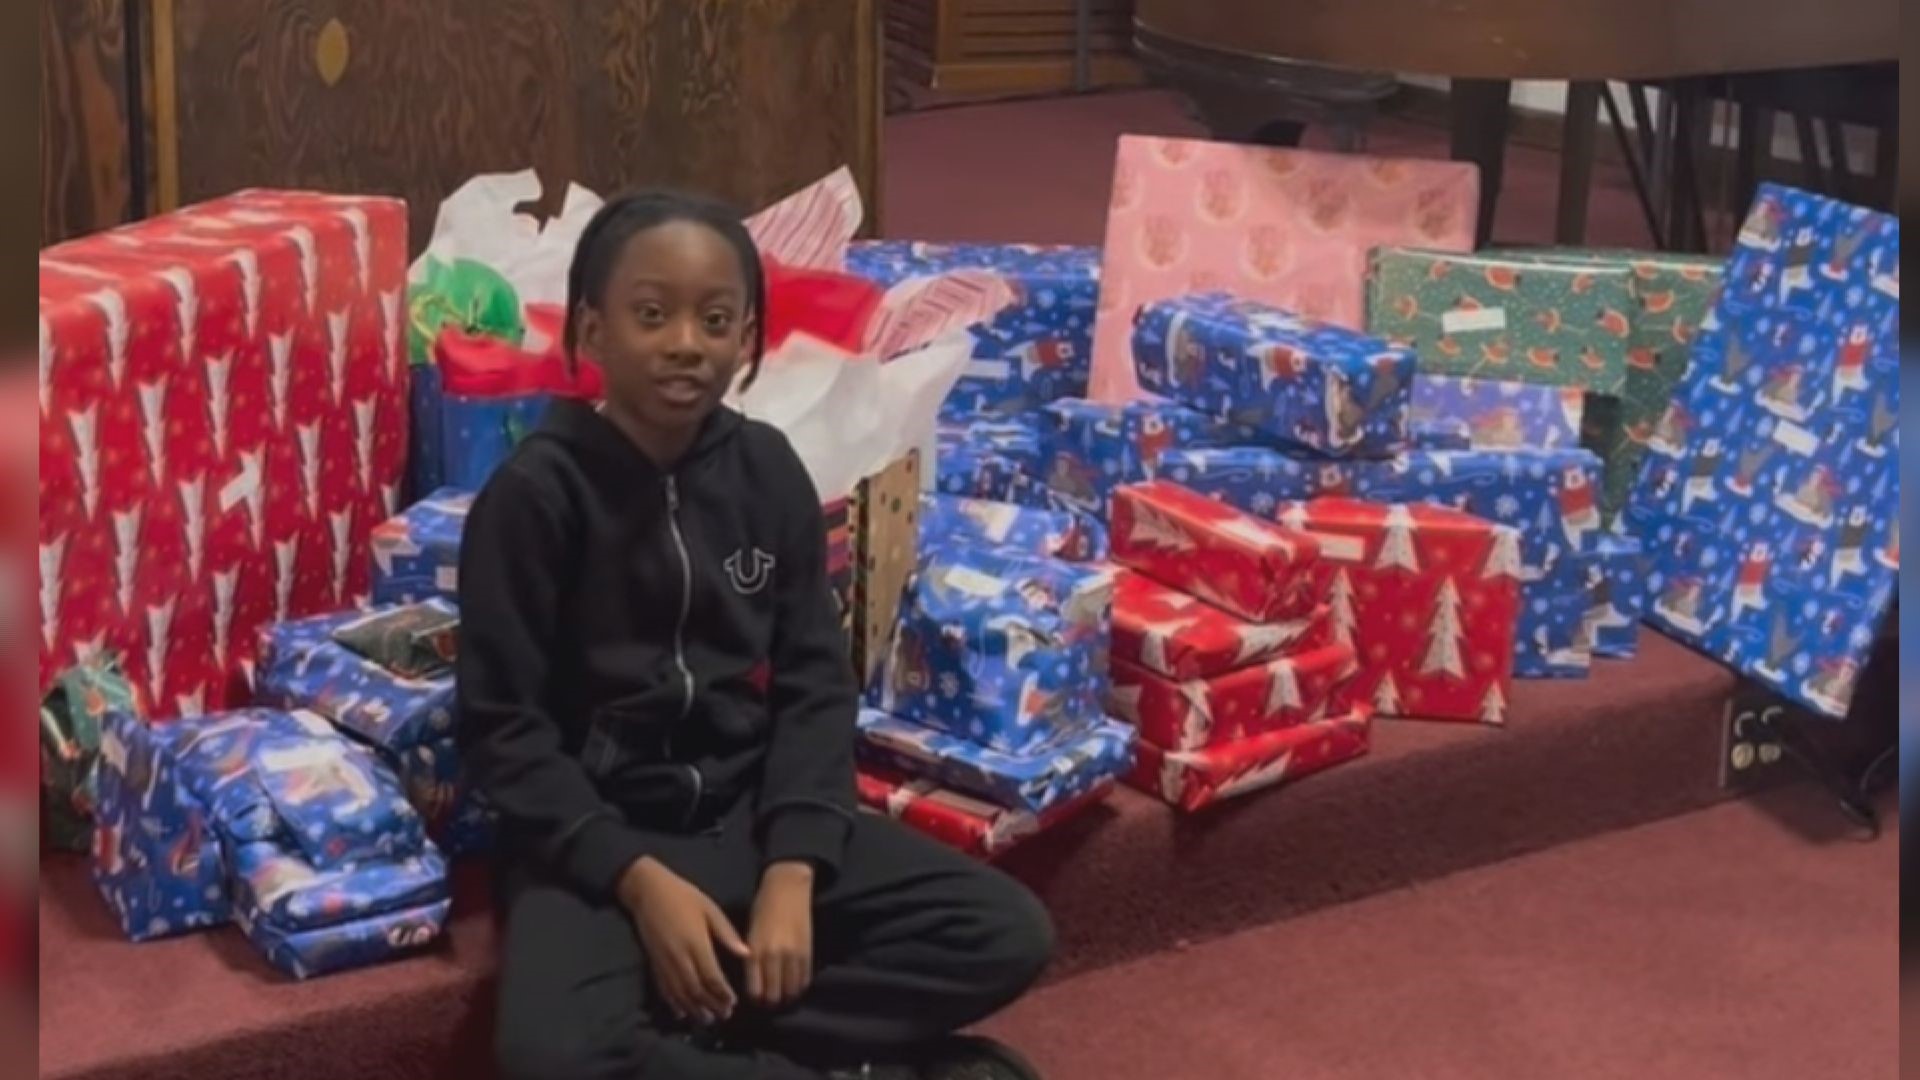 fourth-grader is hoping this act of kindness will help those who might not be able to celebrate a traditional Christmas.